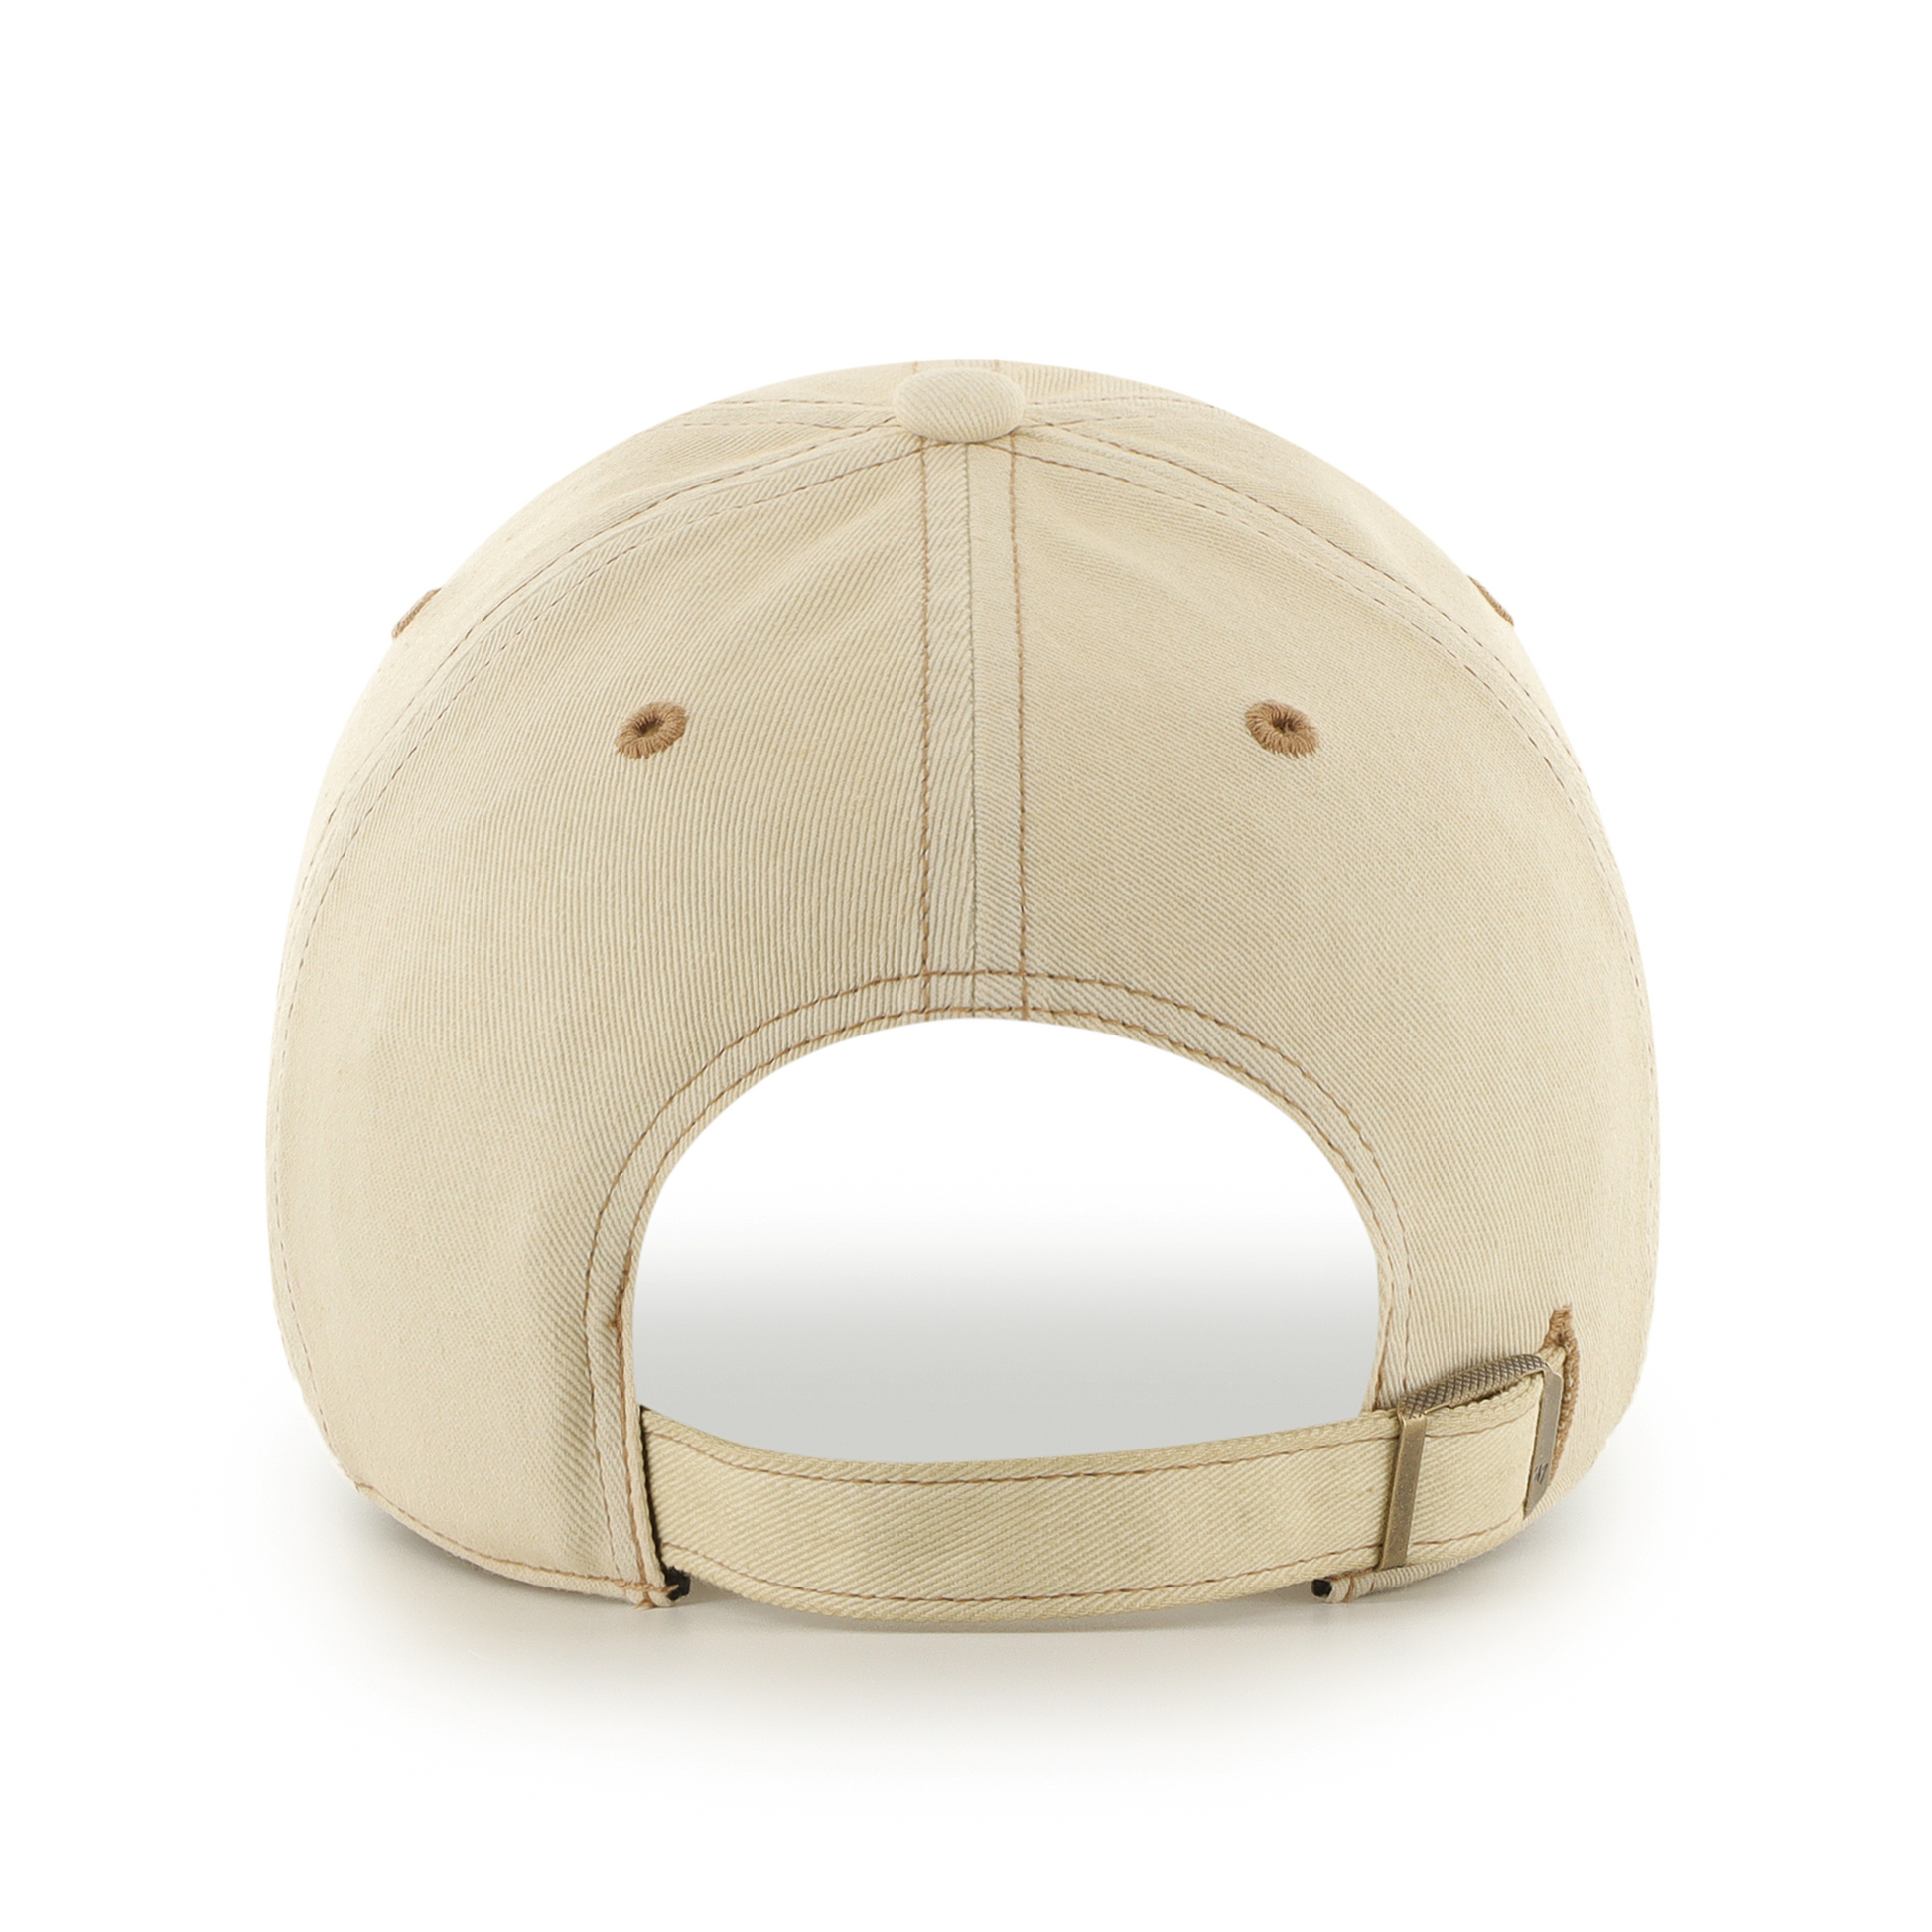 Back: Cream hat with adjustable strap and metal clasp